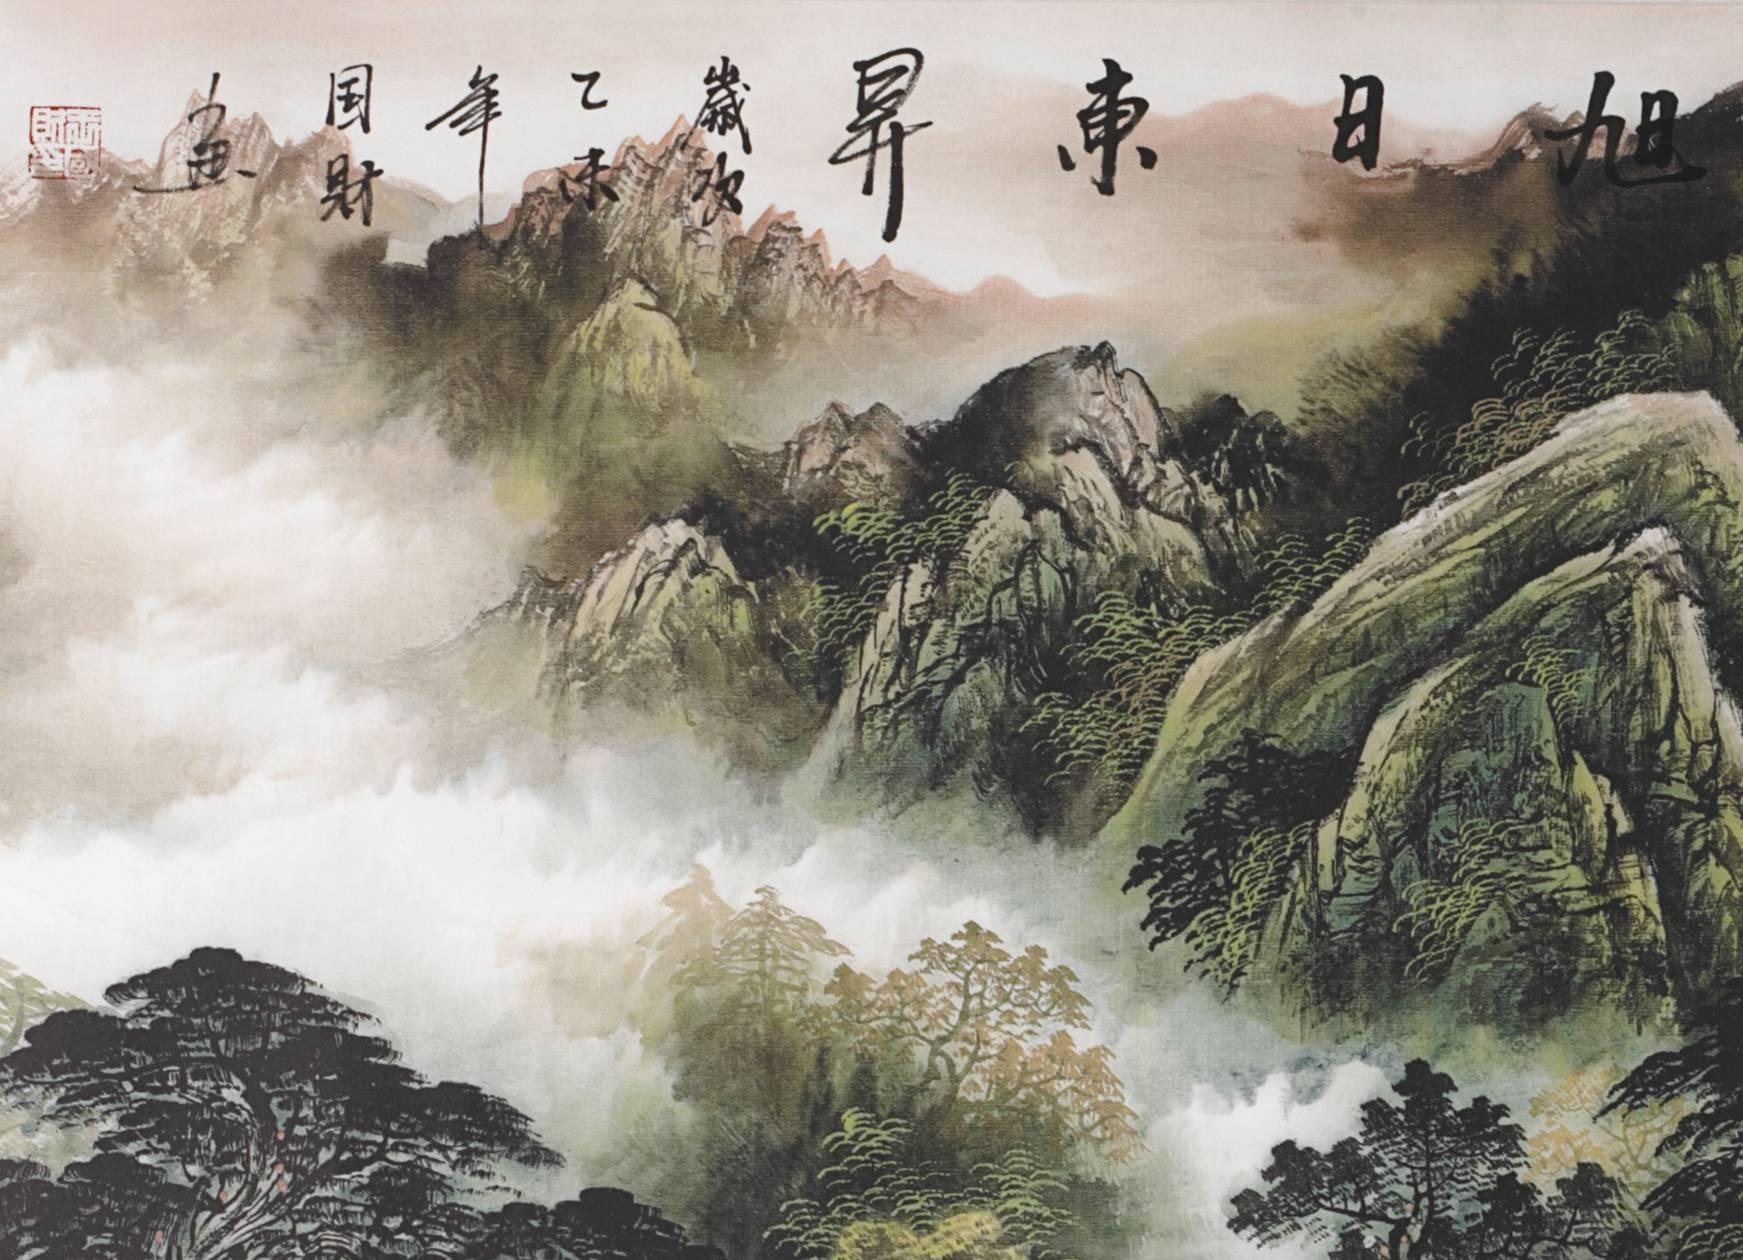 This large painting is a work by master painter Mei Feng. Visit his atelier in the heart of Shenzhen is a unique experience that brings to a place where time is suspended.
Despite the productive frenzy that characterizes this region of China, the